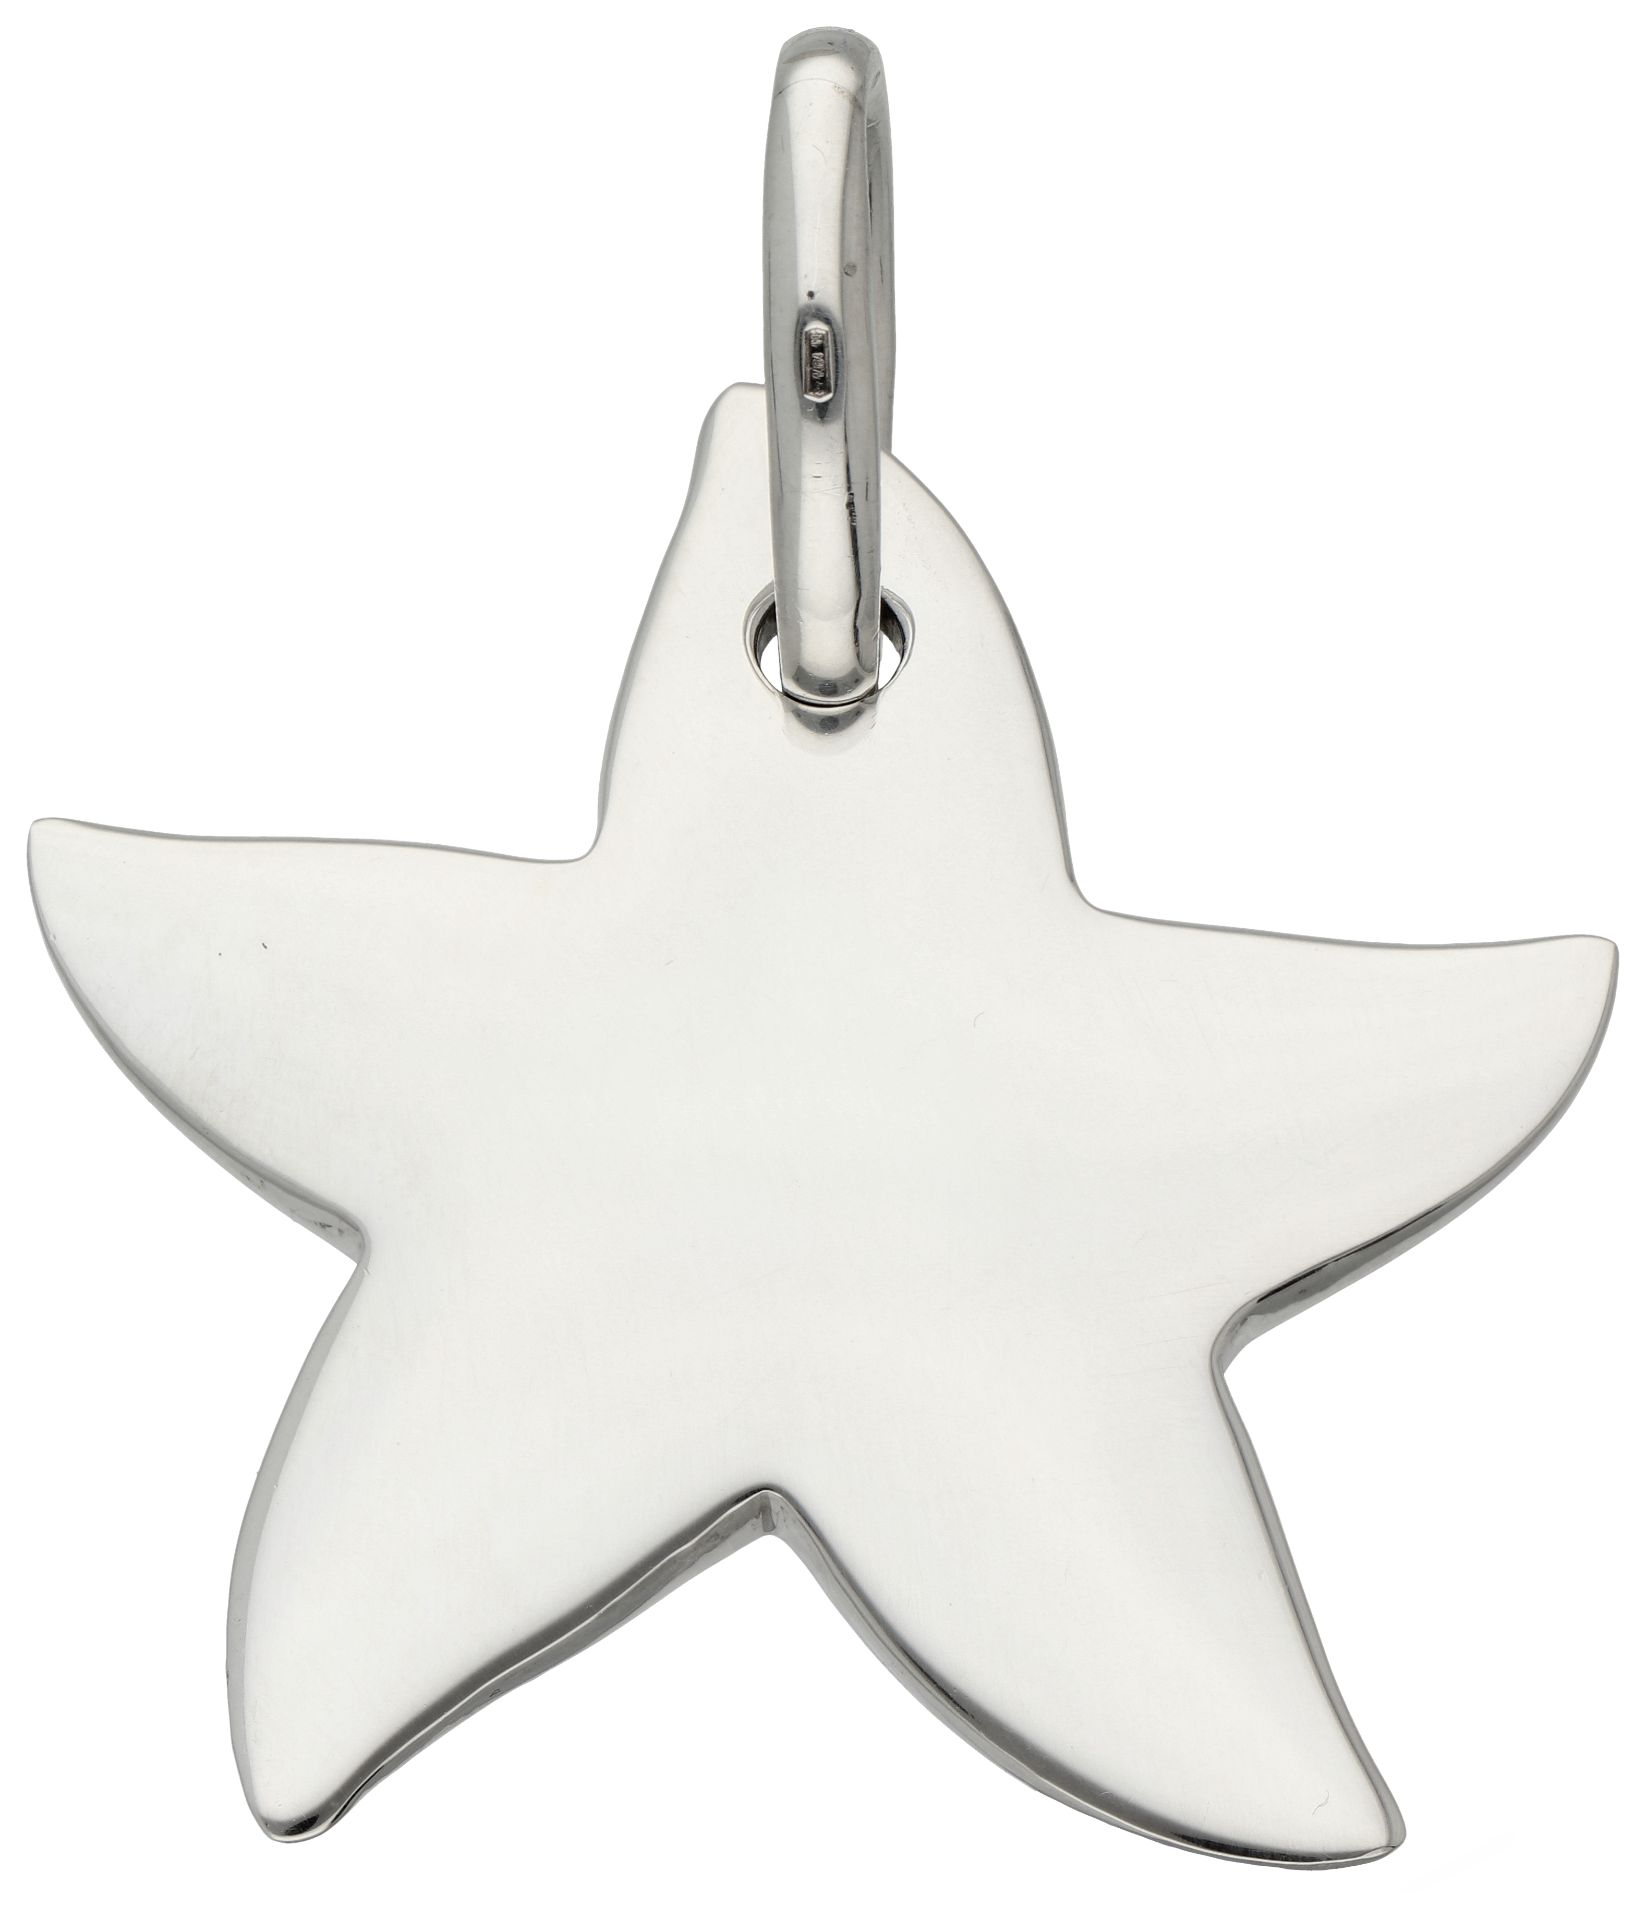 No Reserve - Pomellato sterling silver star-shaped pendant from the Dodo collection. - Image 2 of 3